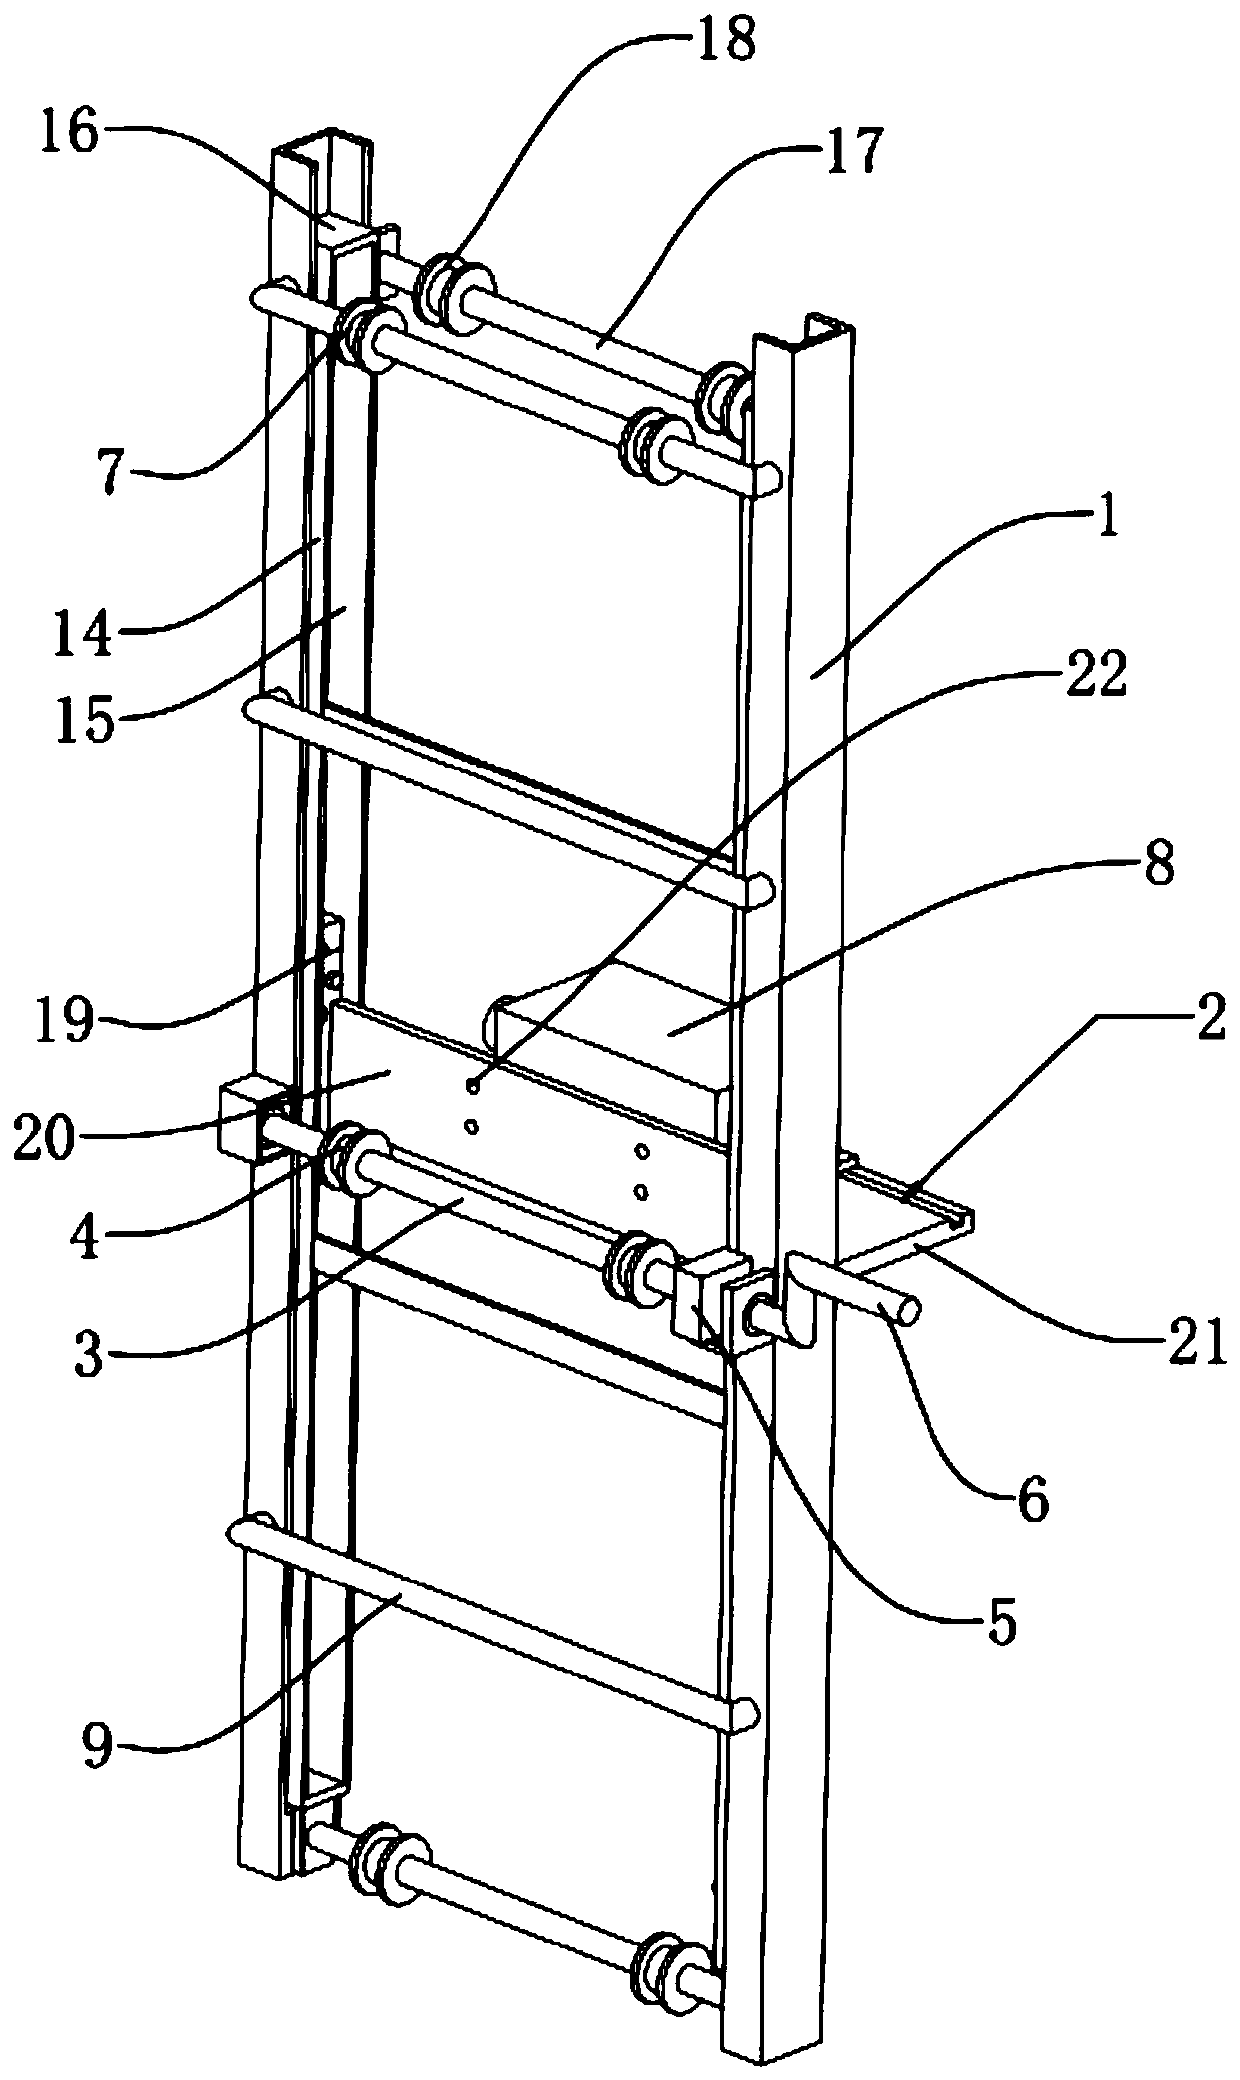 Portal for wall face slotting and punching device